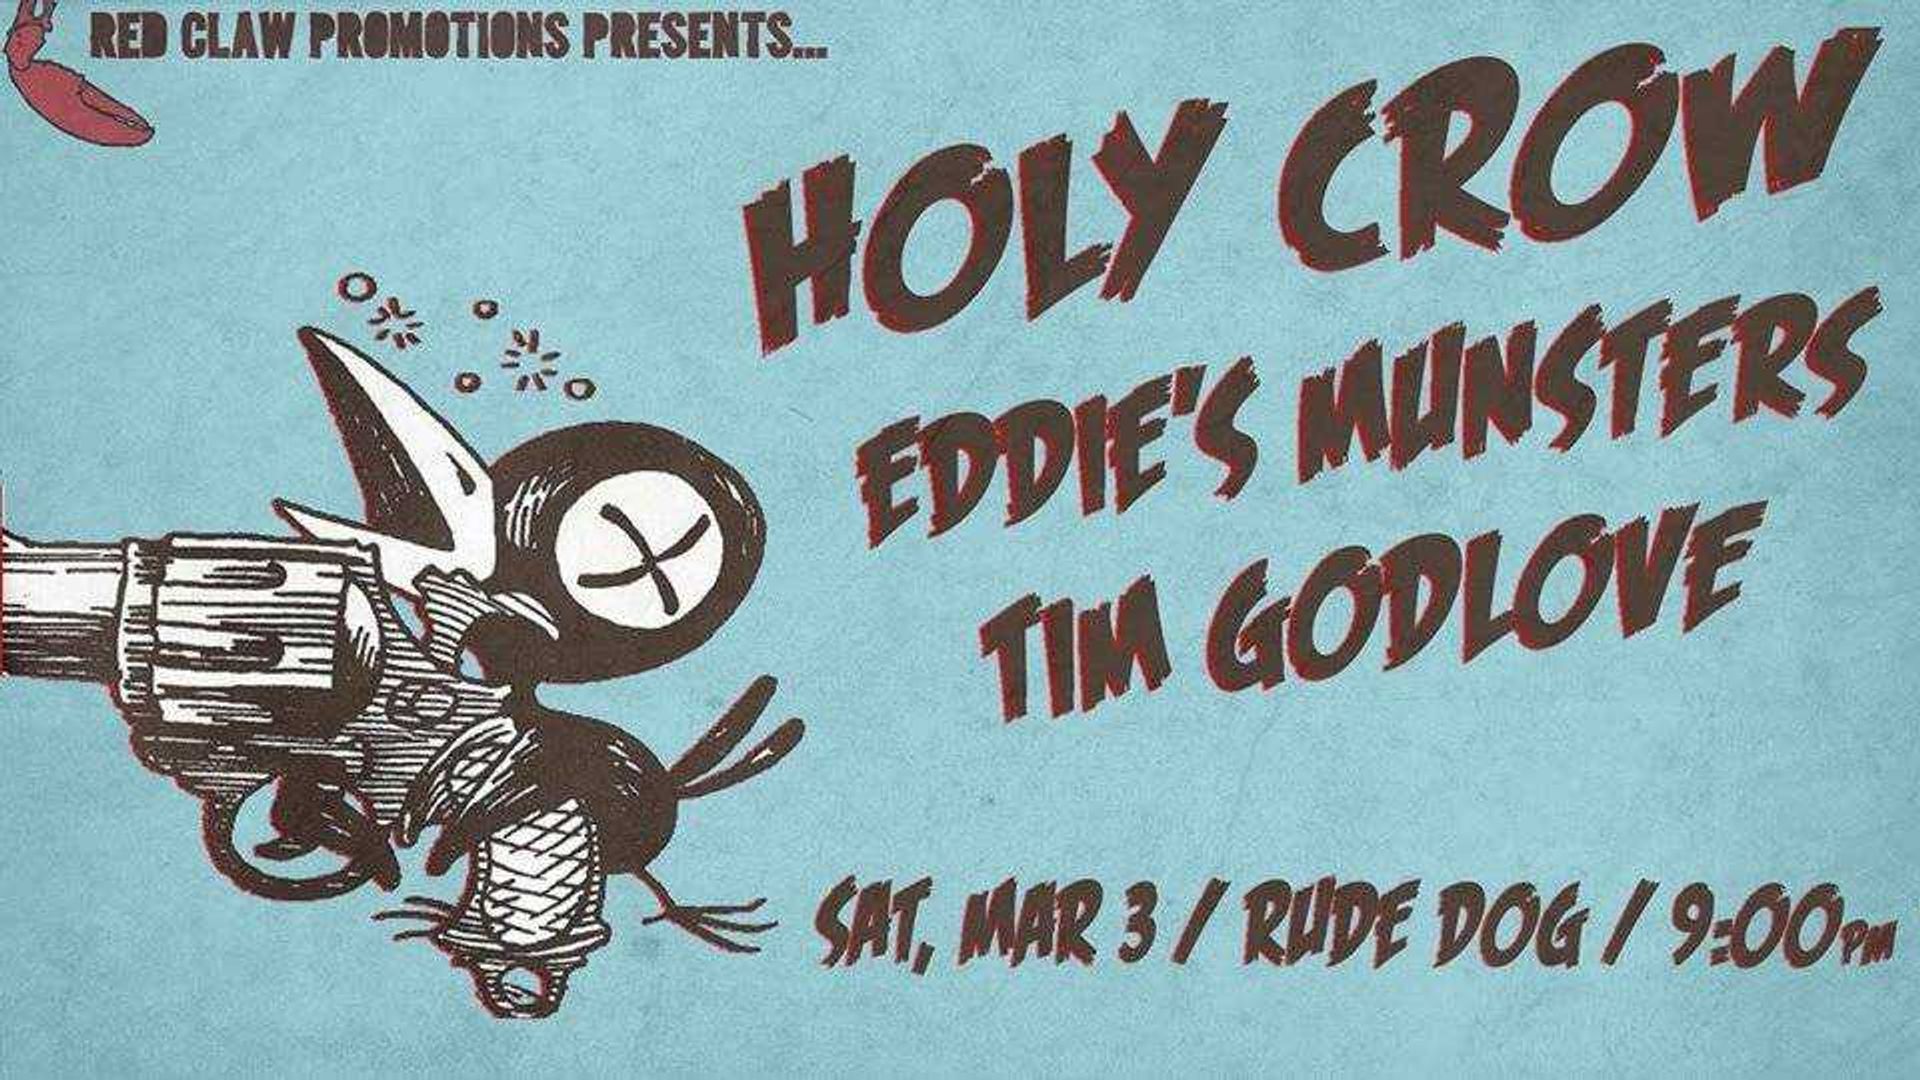 The poster for Holy Crow, Eddie's Munsters and Tim Godlove at the Rude Dog Pub Saturday March 3.